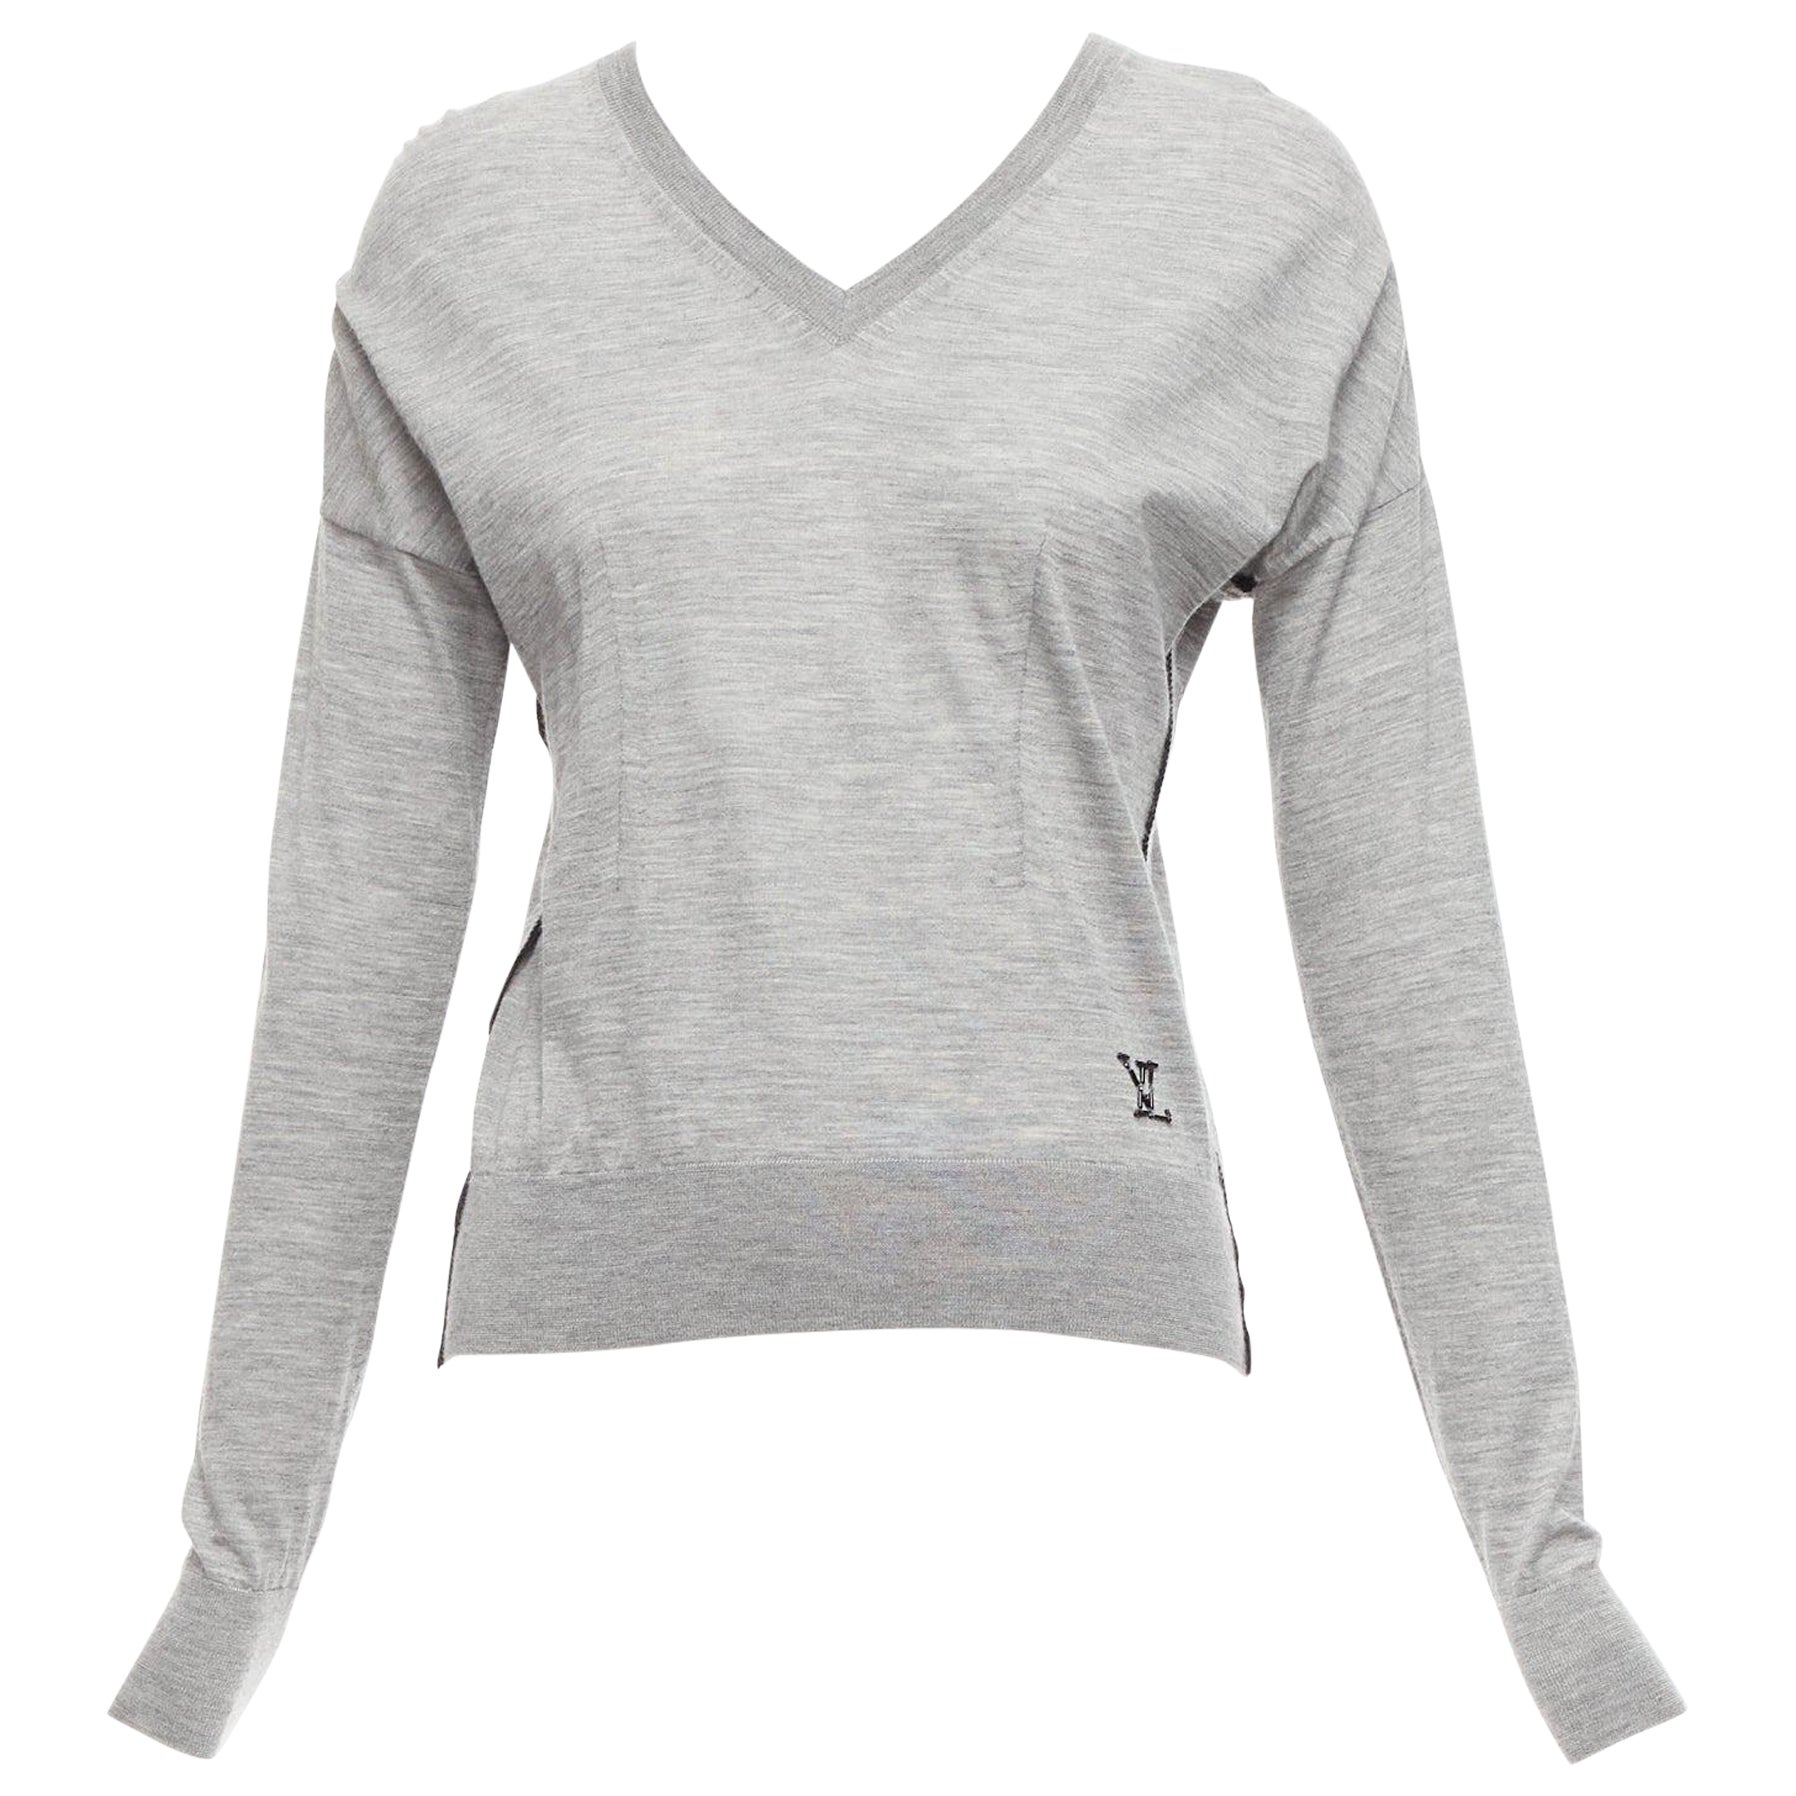 LOUIS VUITTON grey soft knit black beaded LV logo V neck pullover top For Sale